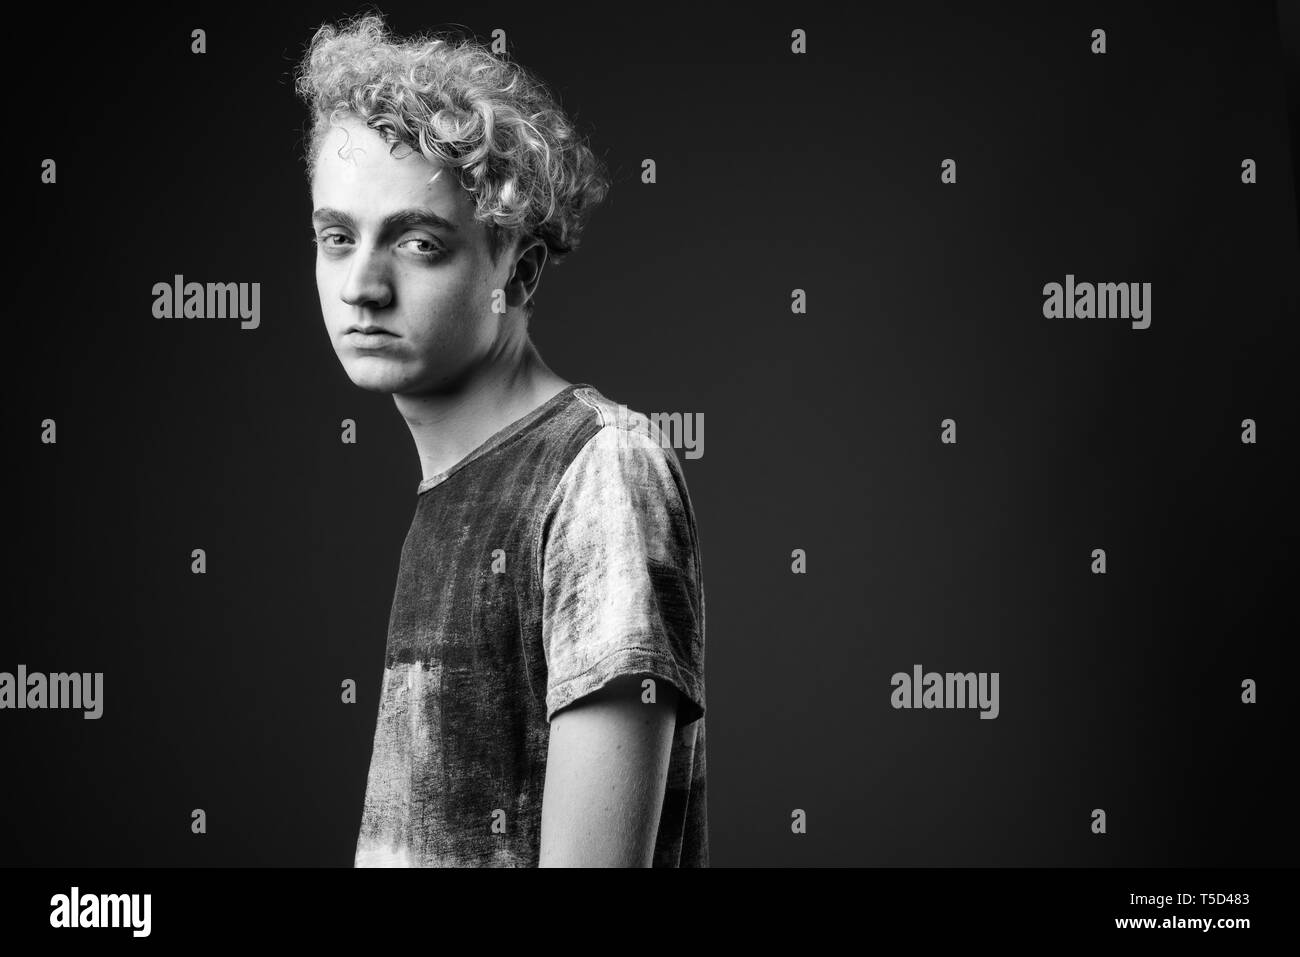 Skinny young man with curly hair against gray background in blac Stock Photo